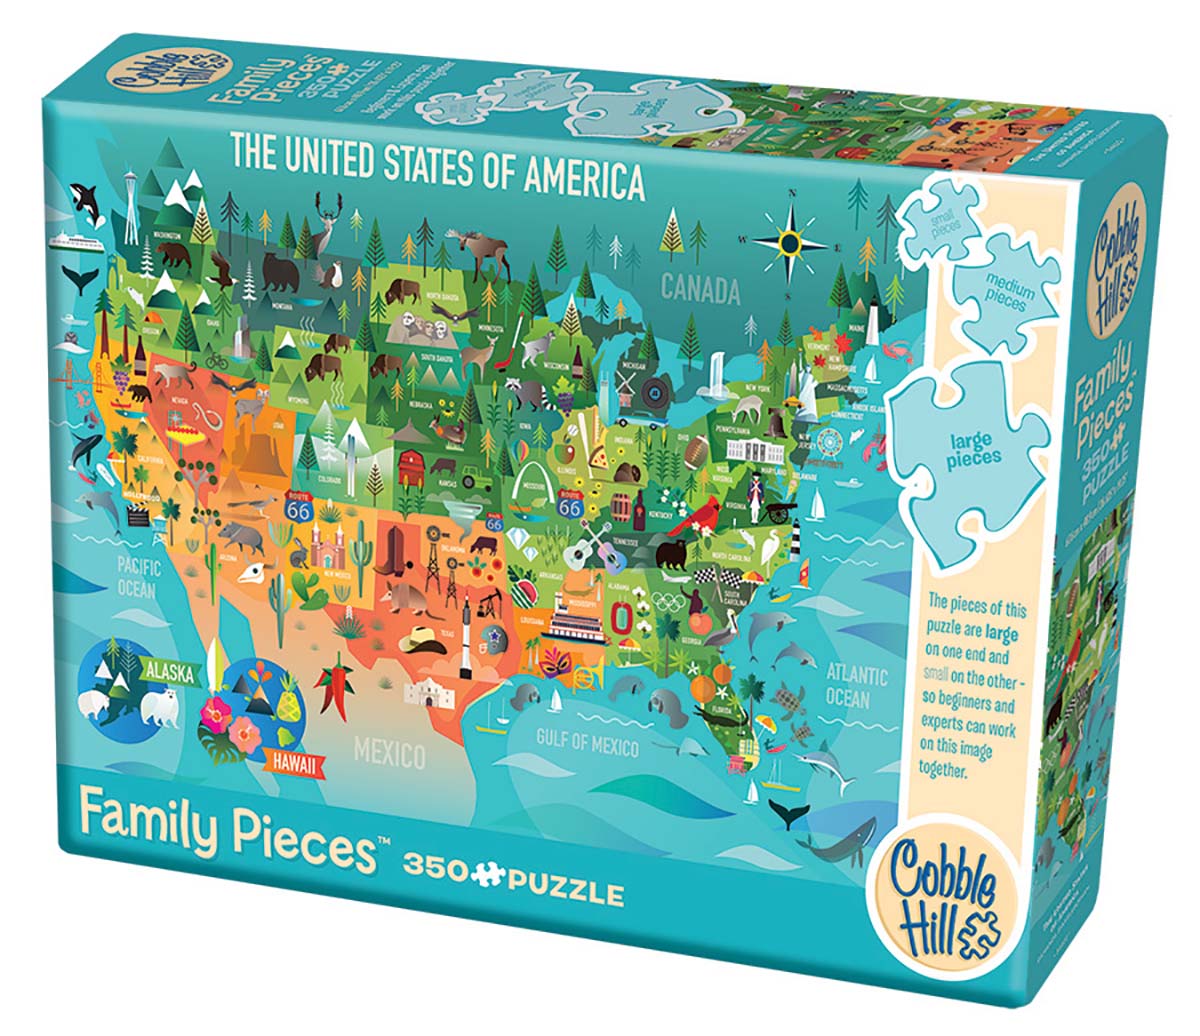 The United States of America Maps & Geography Jigsaw Puzzle